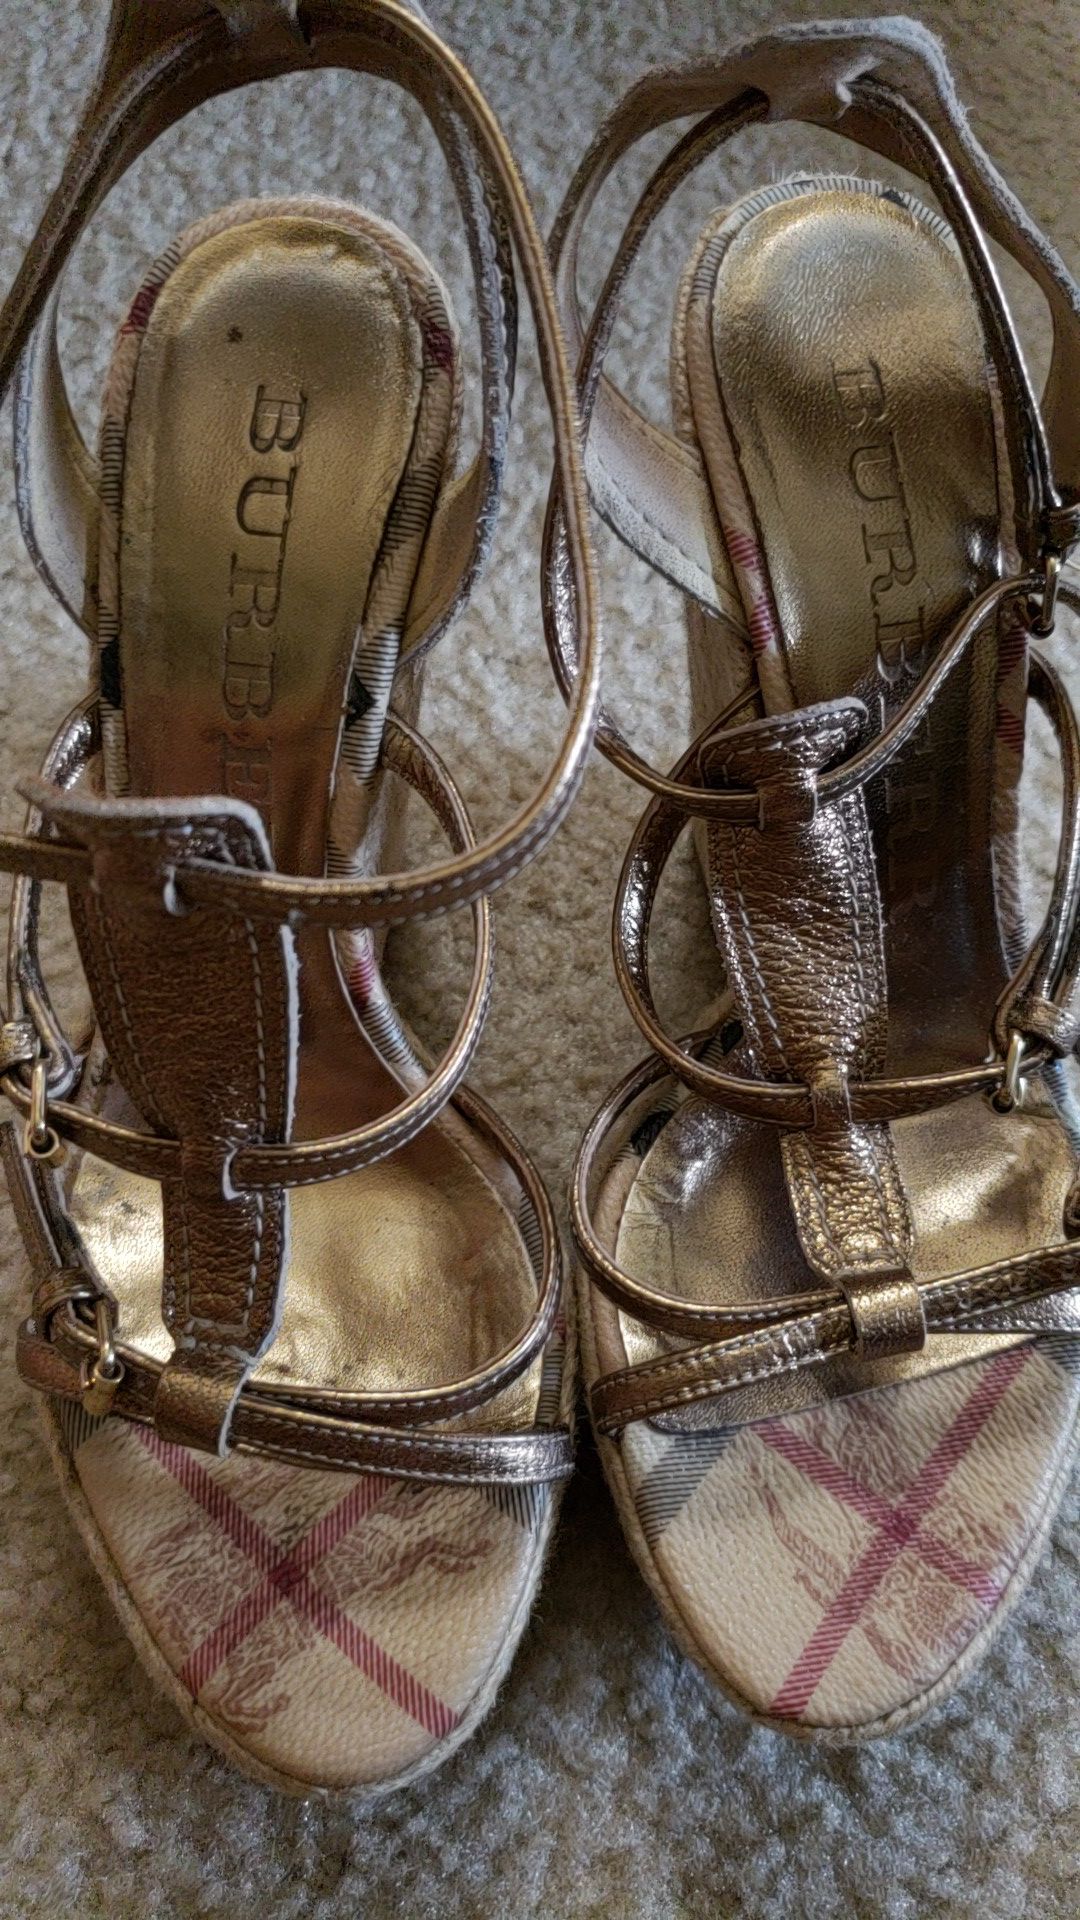 Burberry Sandals | Very Good Condition | Size 37,5 eu | Made in Italy